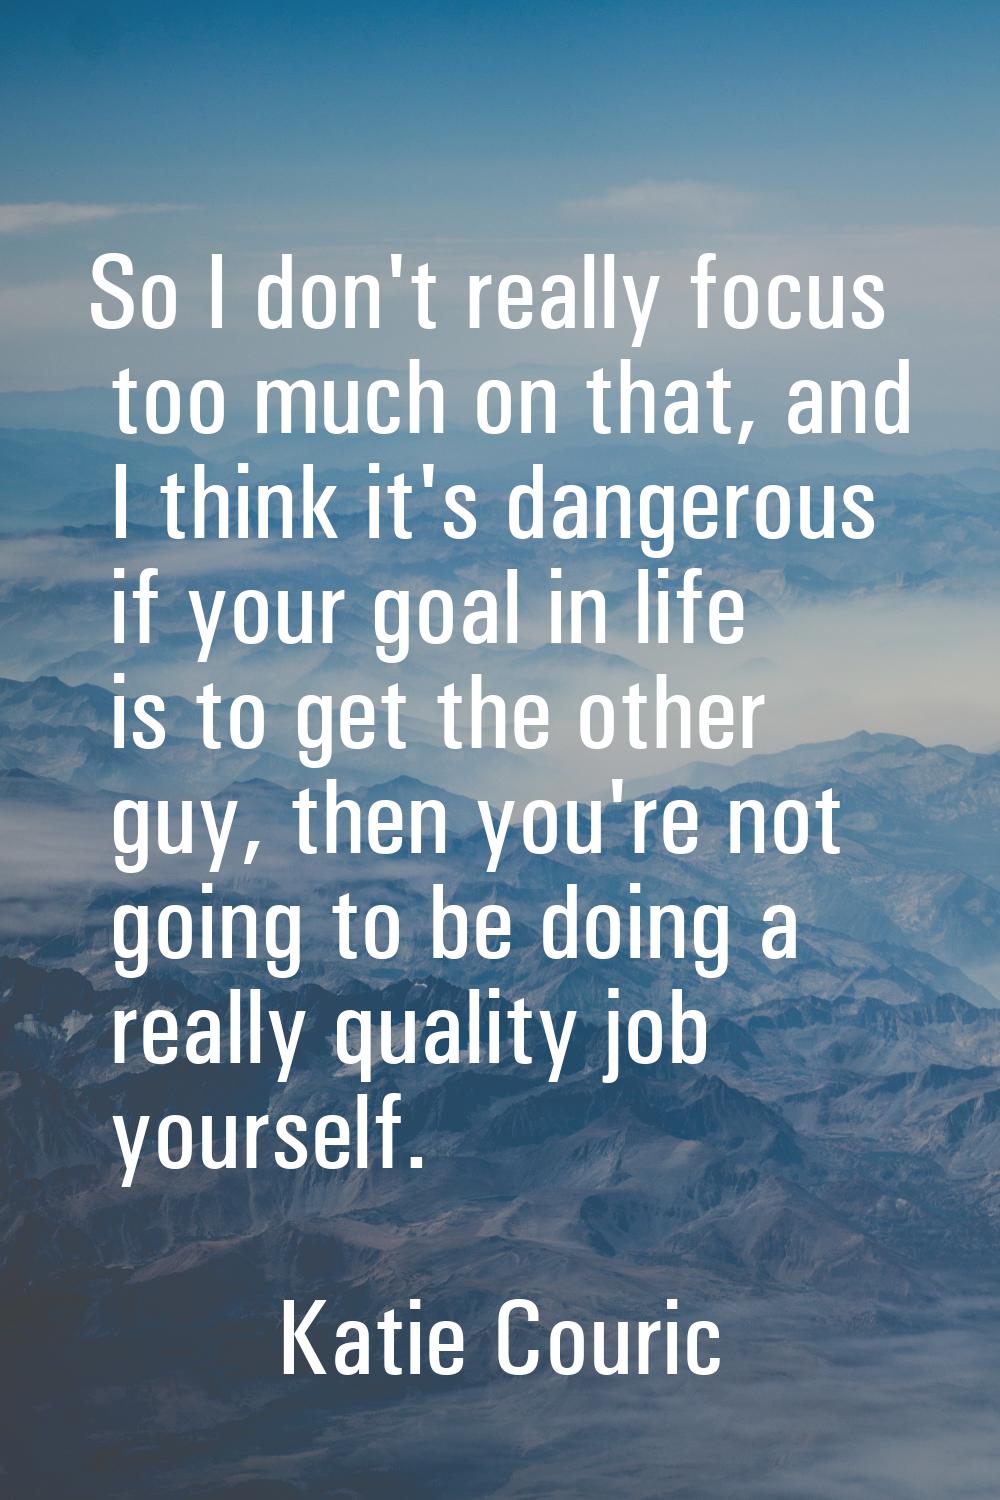 So I don't really focus too much on that, and I think it's dangerous if your goal in life is to get